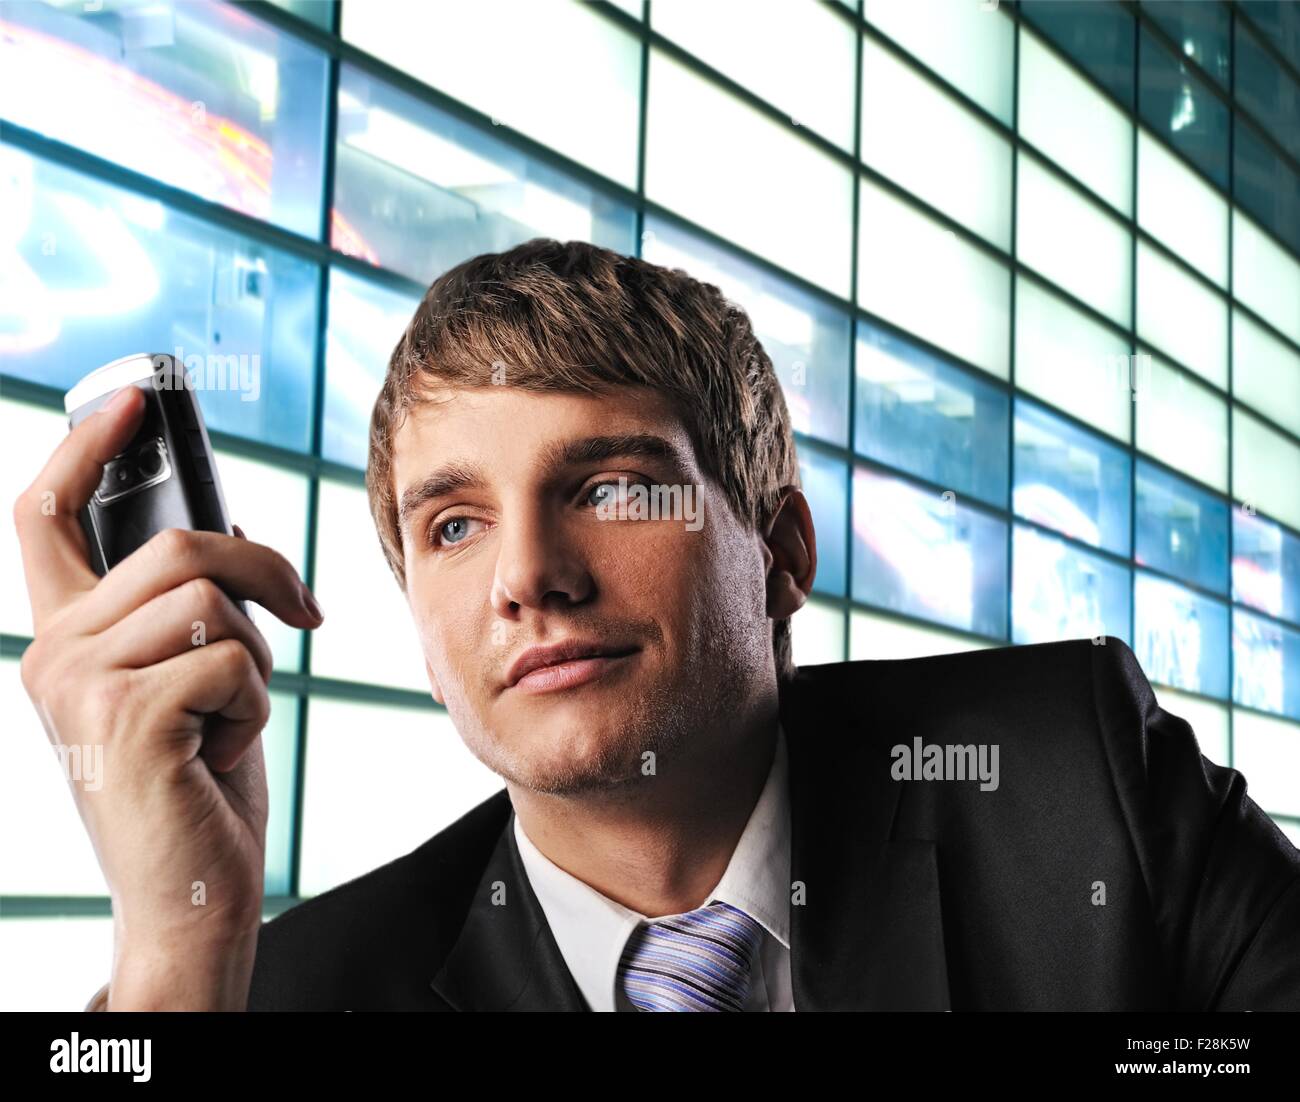 Young businessman with mobile phone over abstract background Stock Photo